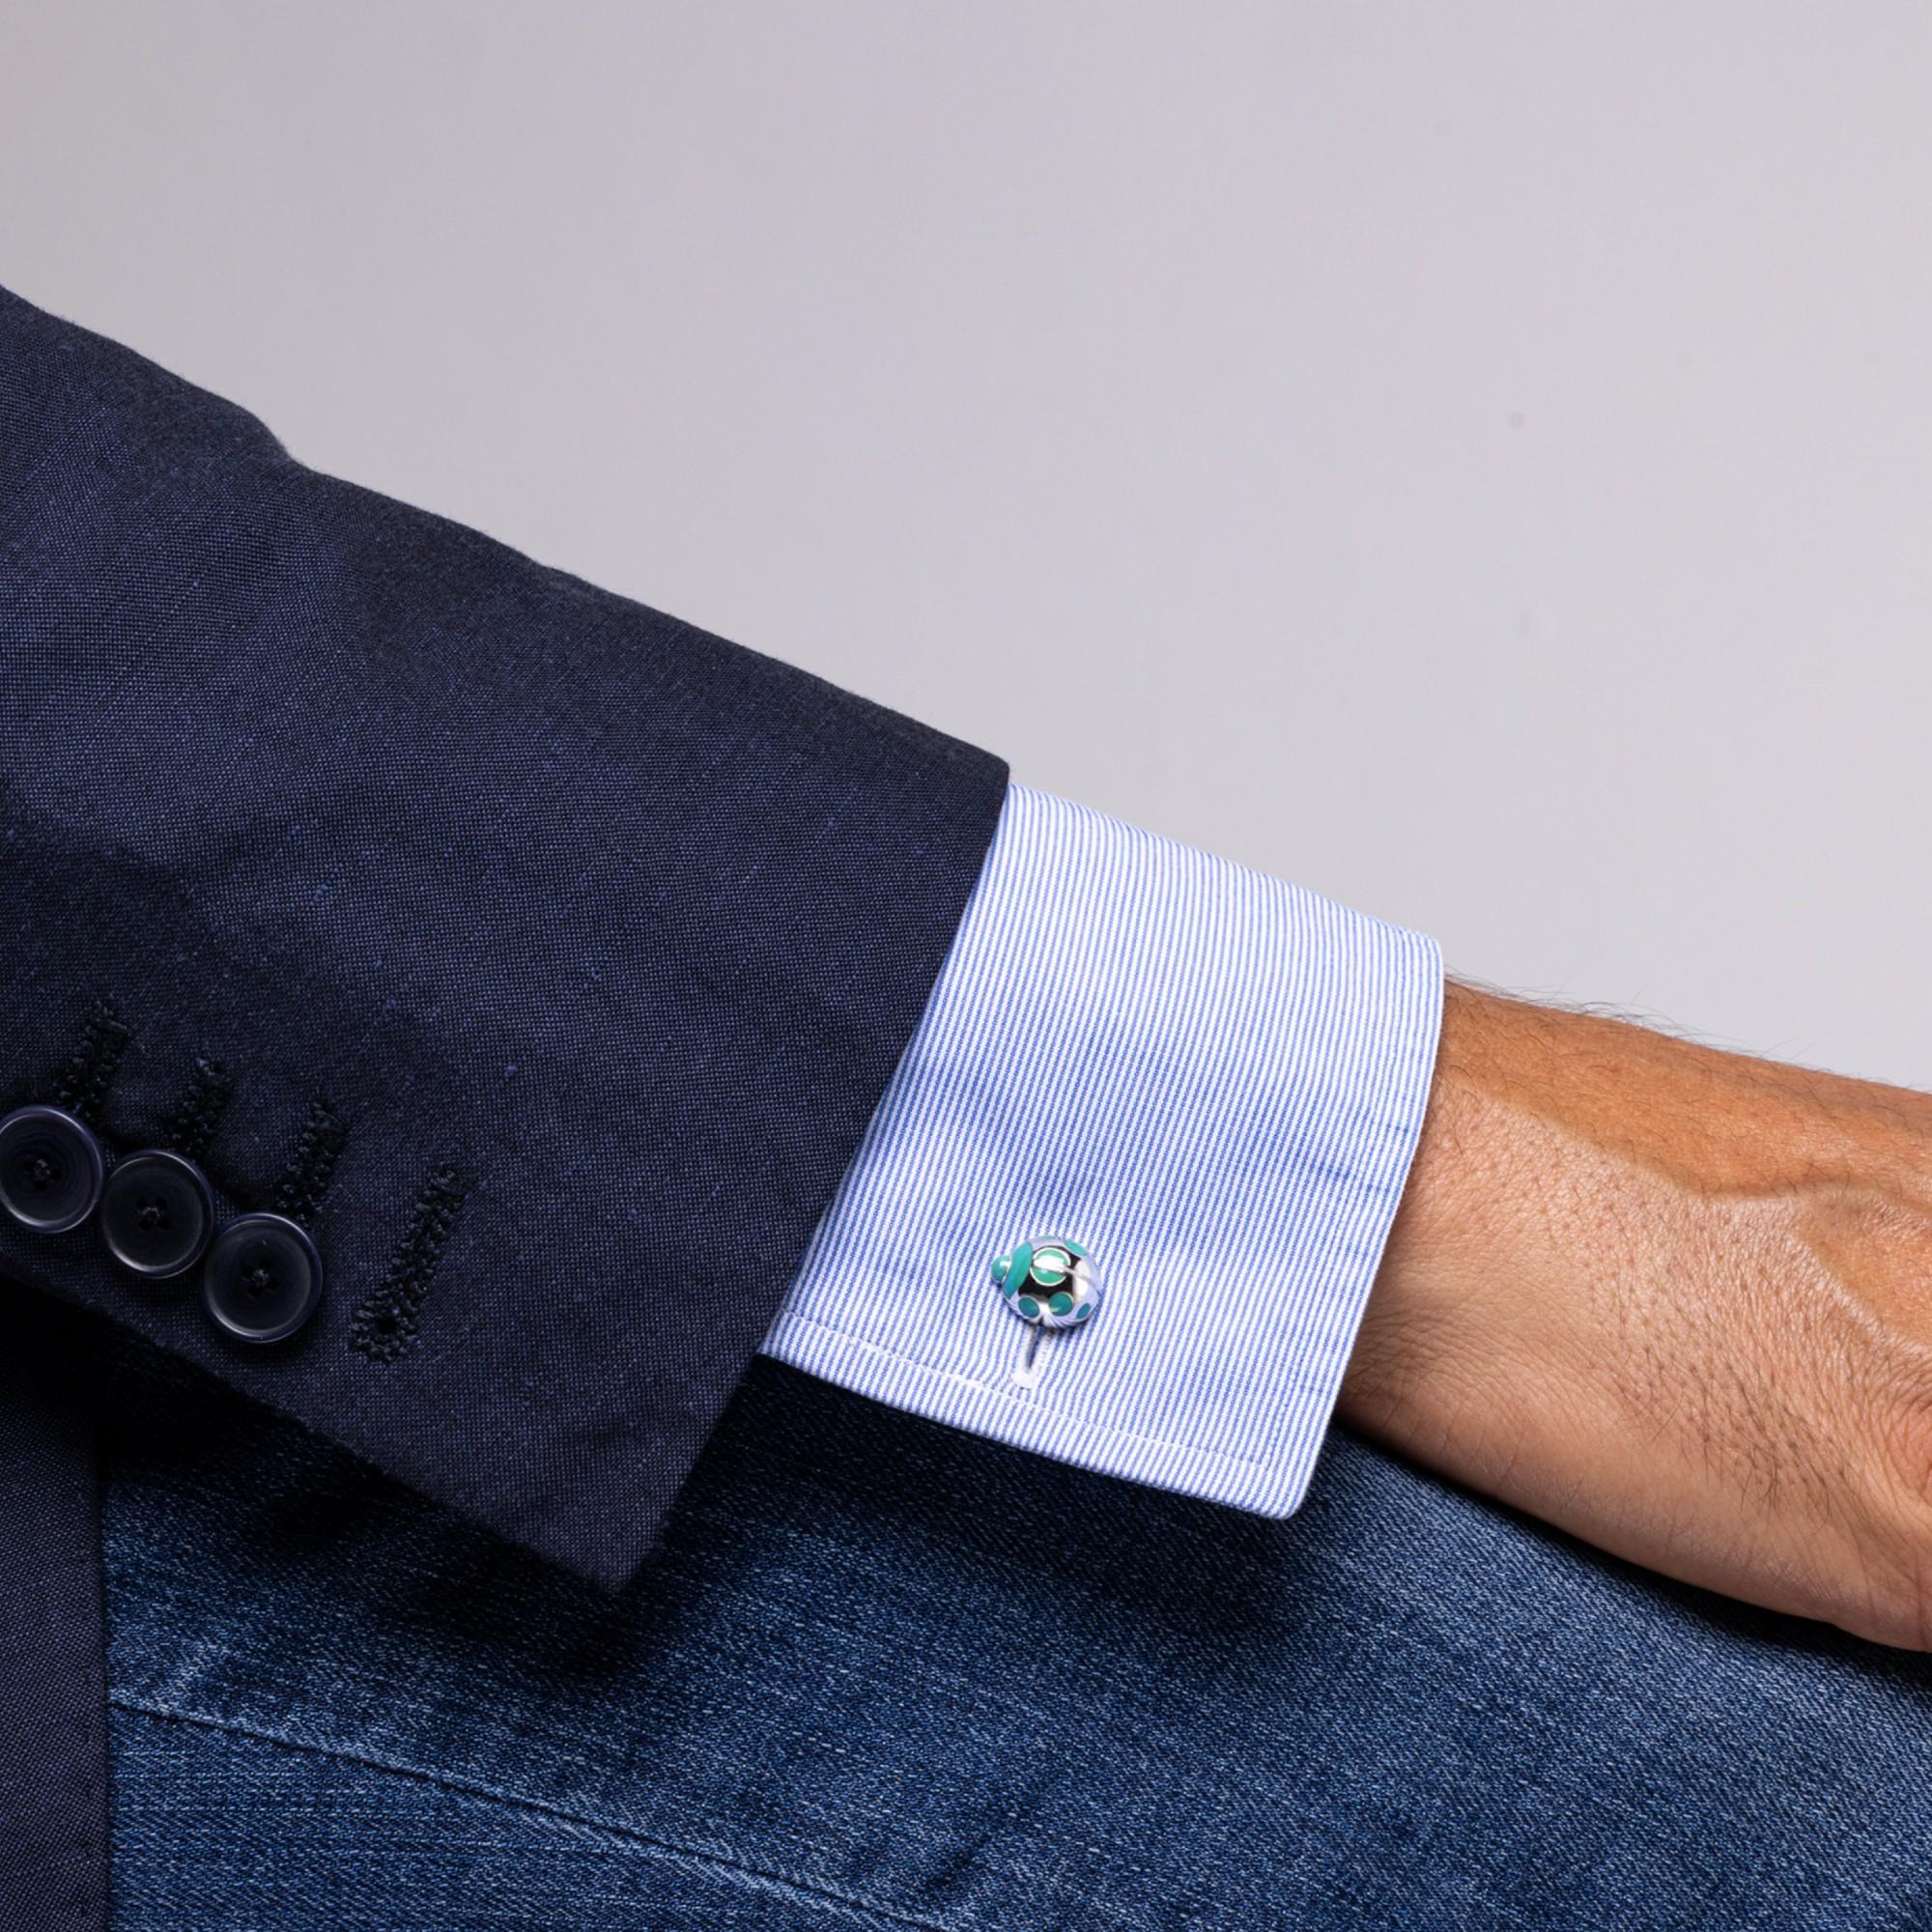 Alex Jona design collection, hand crafted in Italy, rhodium plated Sterling Silver ladybug cufflinks with turquoise enamel.  
DIMENSIONS:  0.44 in W x 0.50 in L x 0.23 in D.     11,17 mm W x 12,07 mm L x 5,84 mm D. 

Alex Jona cufflinks stand out,